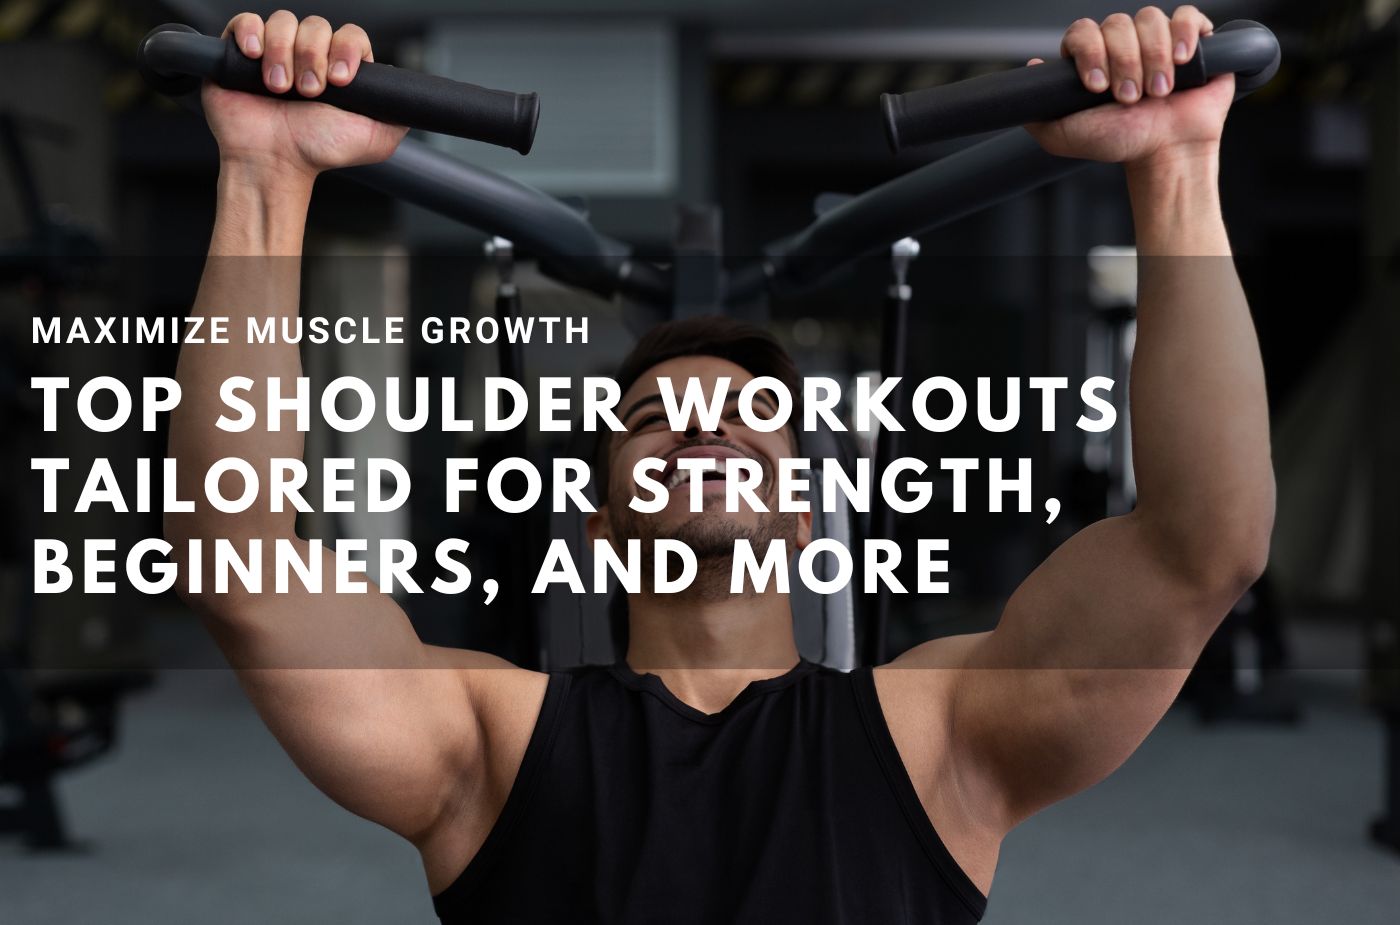 Maximize Muscle Growth: Top Shoulder Workouts Tailored for Strength, Beginners, and More